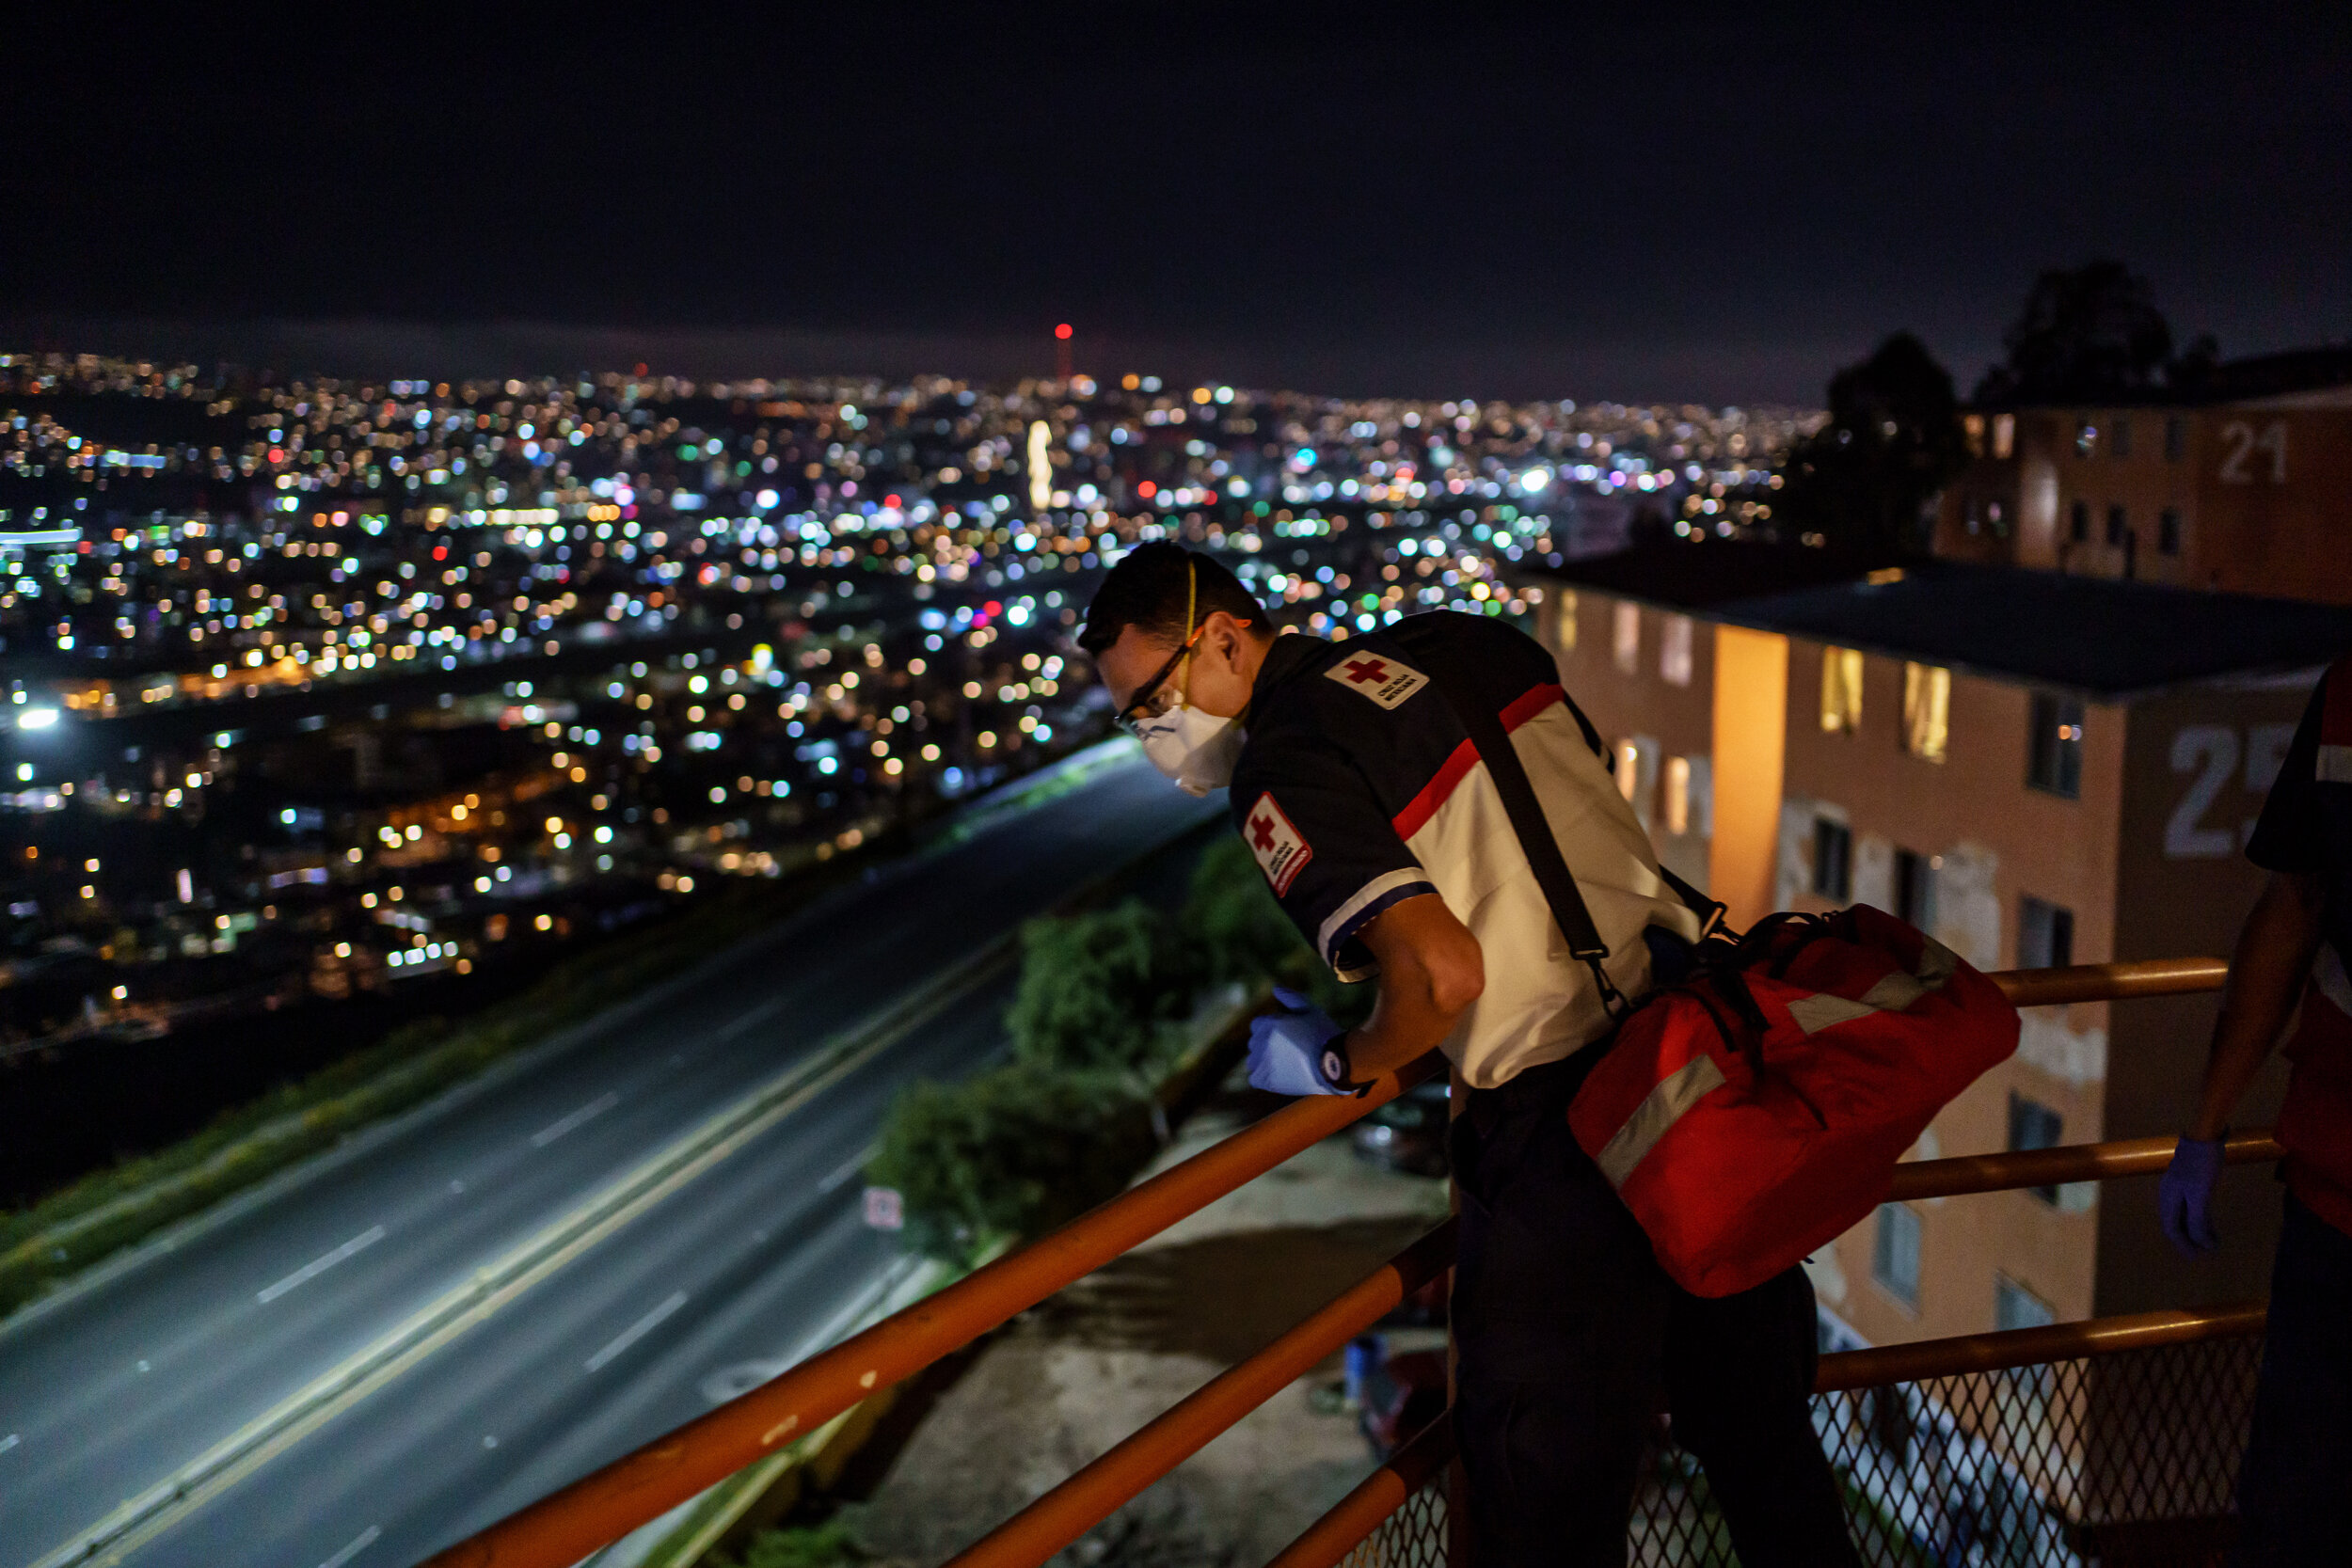  Michael Zavala, 22, a Red Cross paramedic, searches a home after they respond to a call for deceased person, but paramedics did not find any signs of a cadaver, or anyone for that matter, during an emergency call, in Tijuana, Mexico, on May 2, 2020.